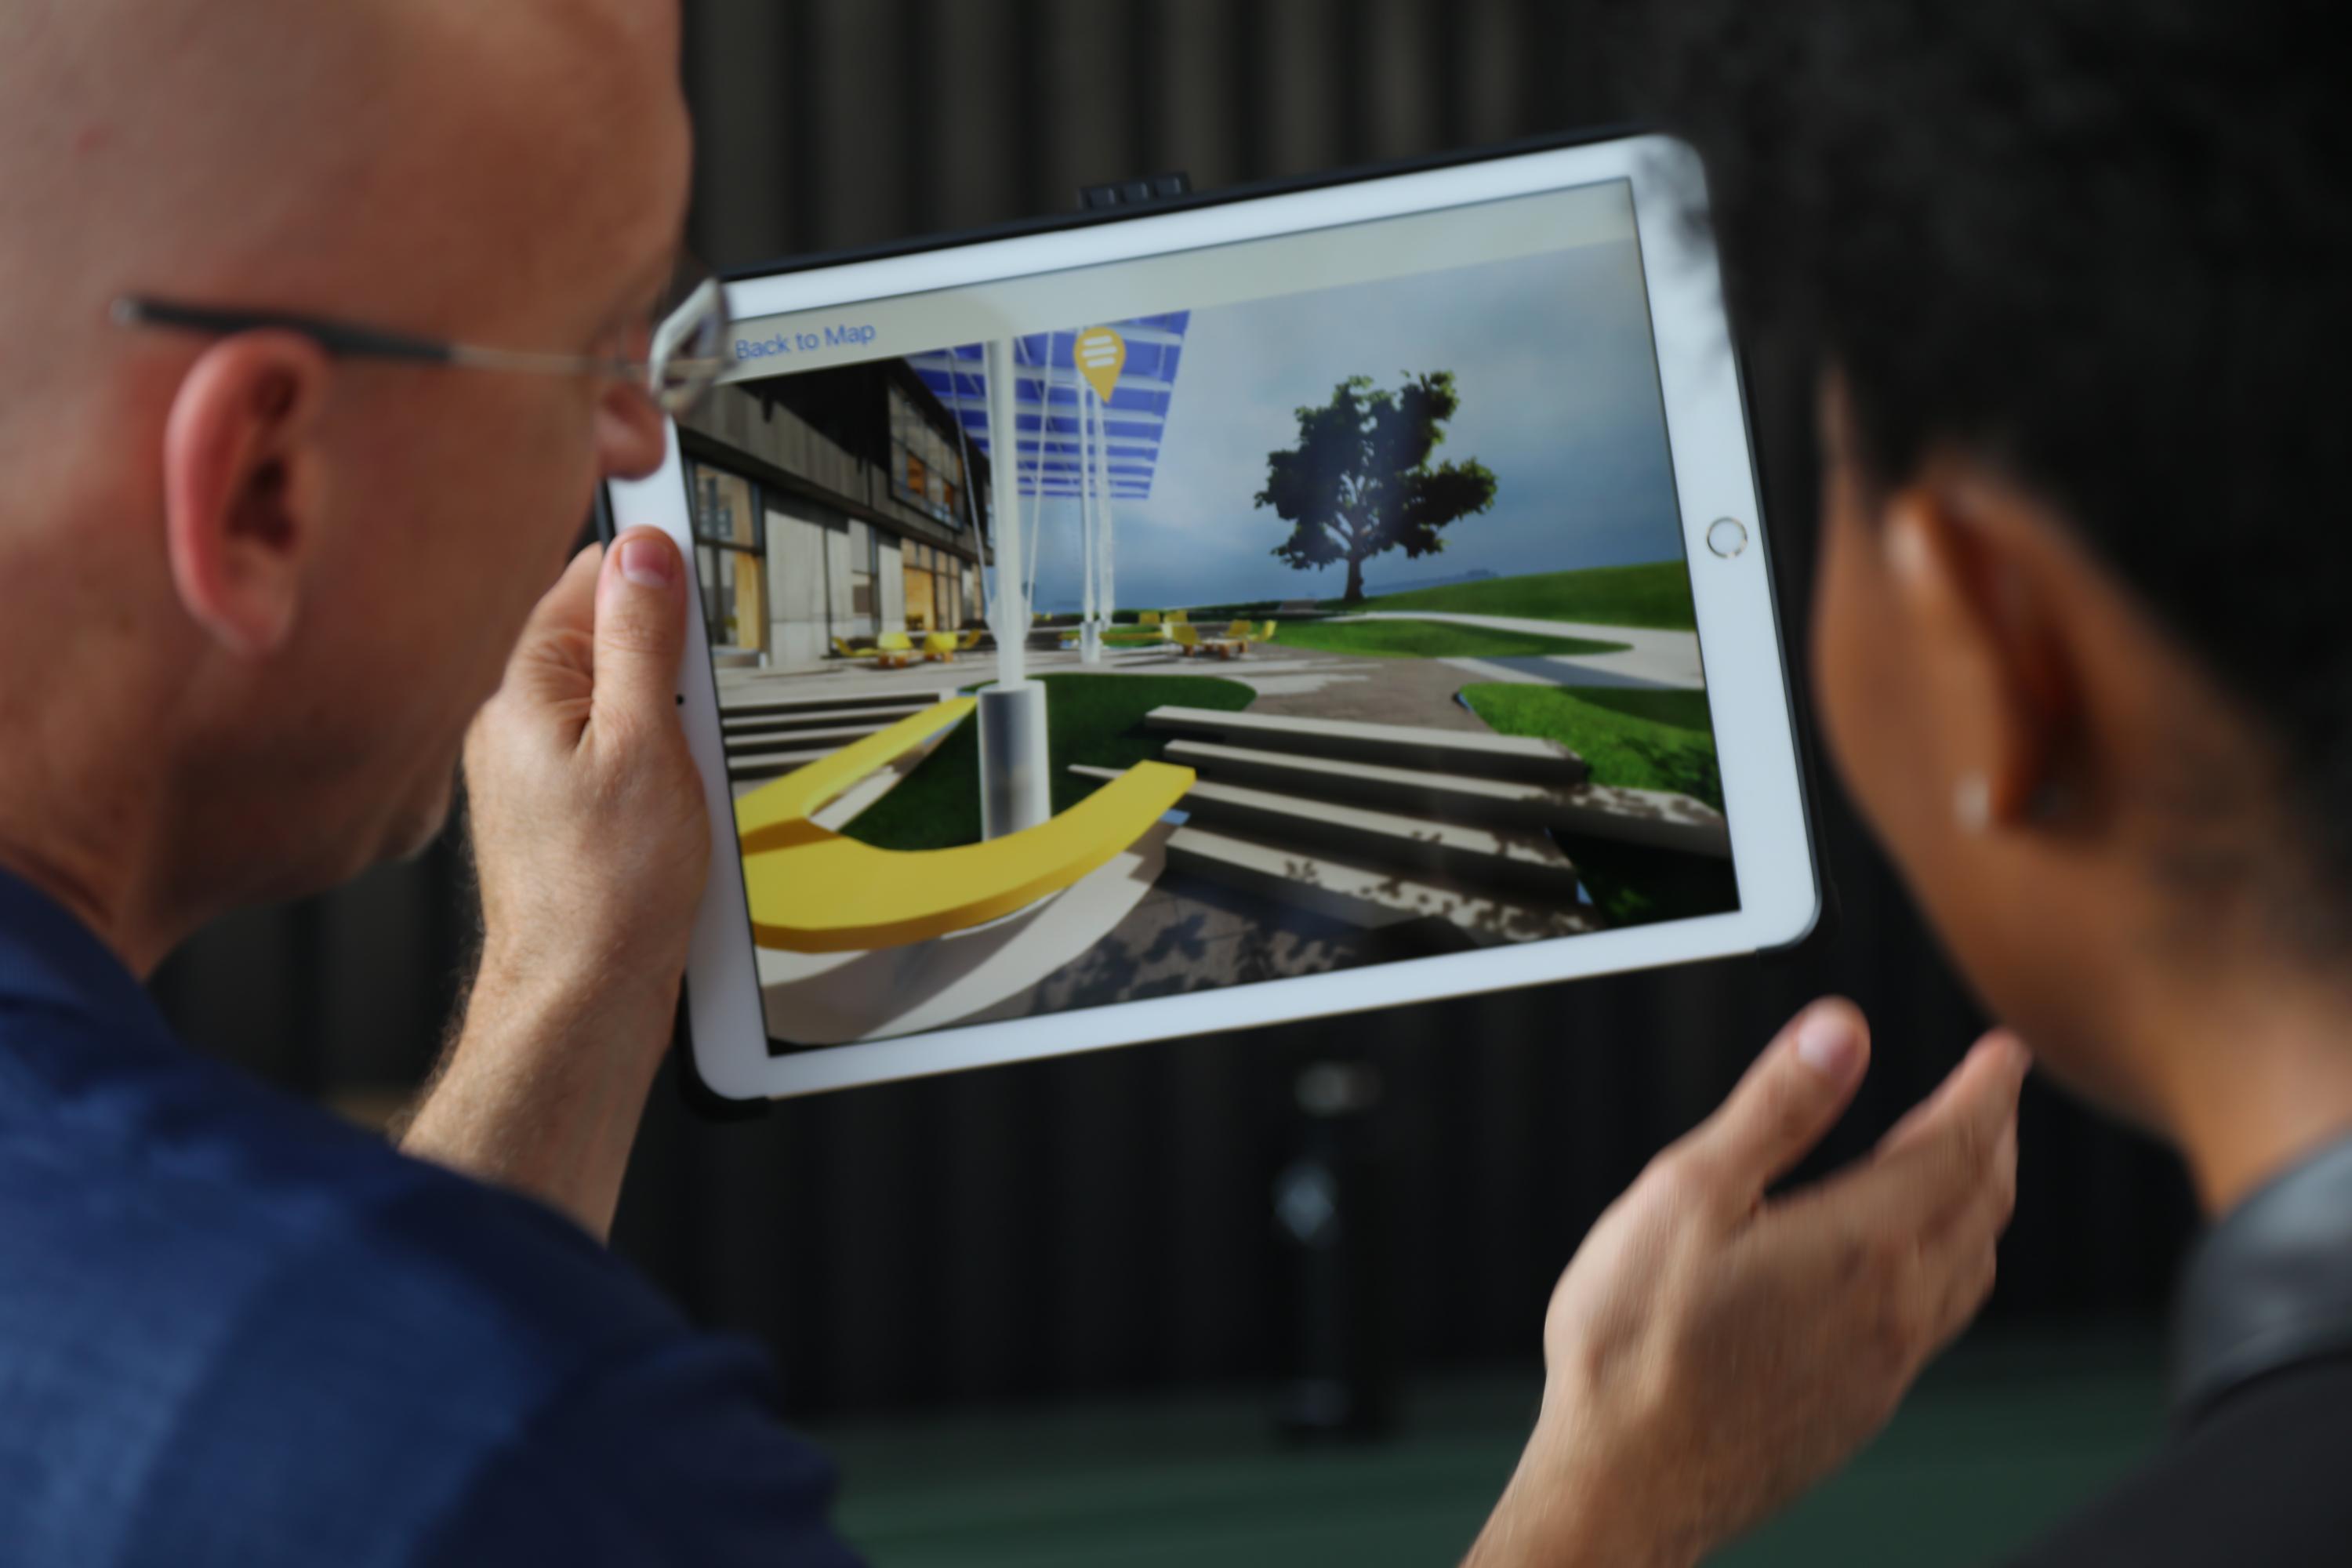 A 360-degree viewer allows users to experience 360-degree views of the building and its surroundings from a set of pre-defined locations on the site using a mobile device.